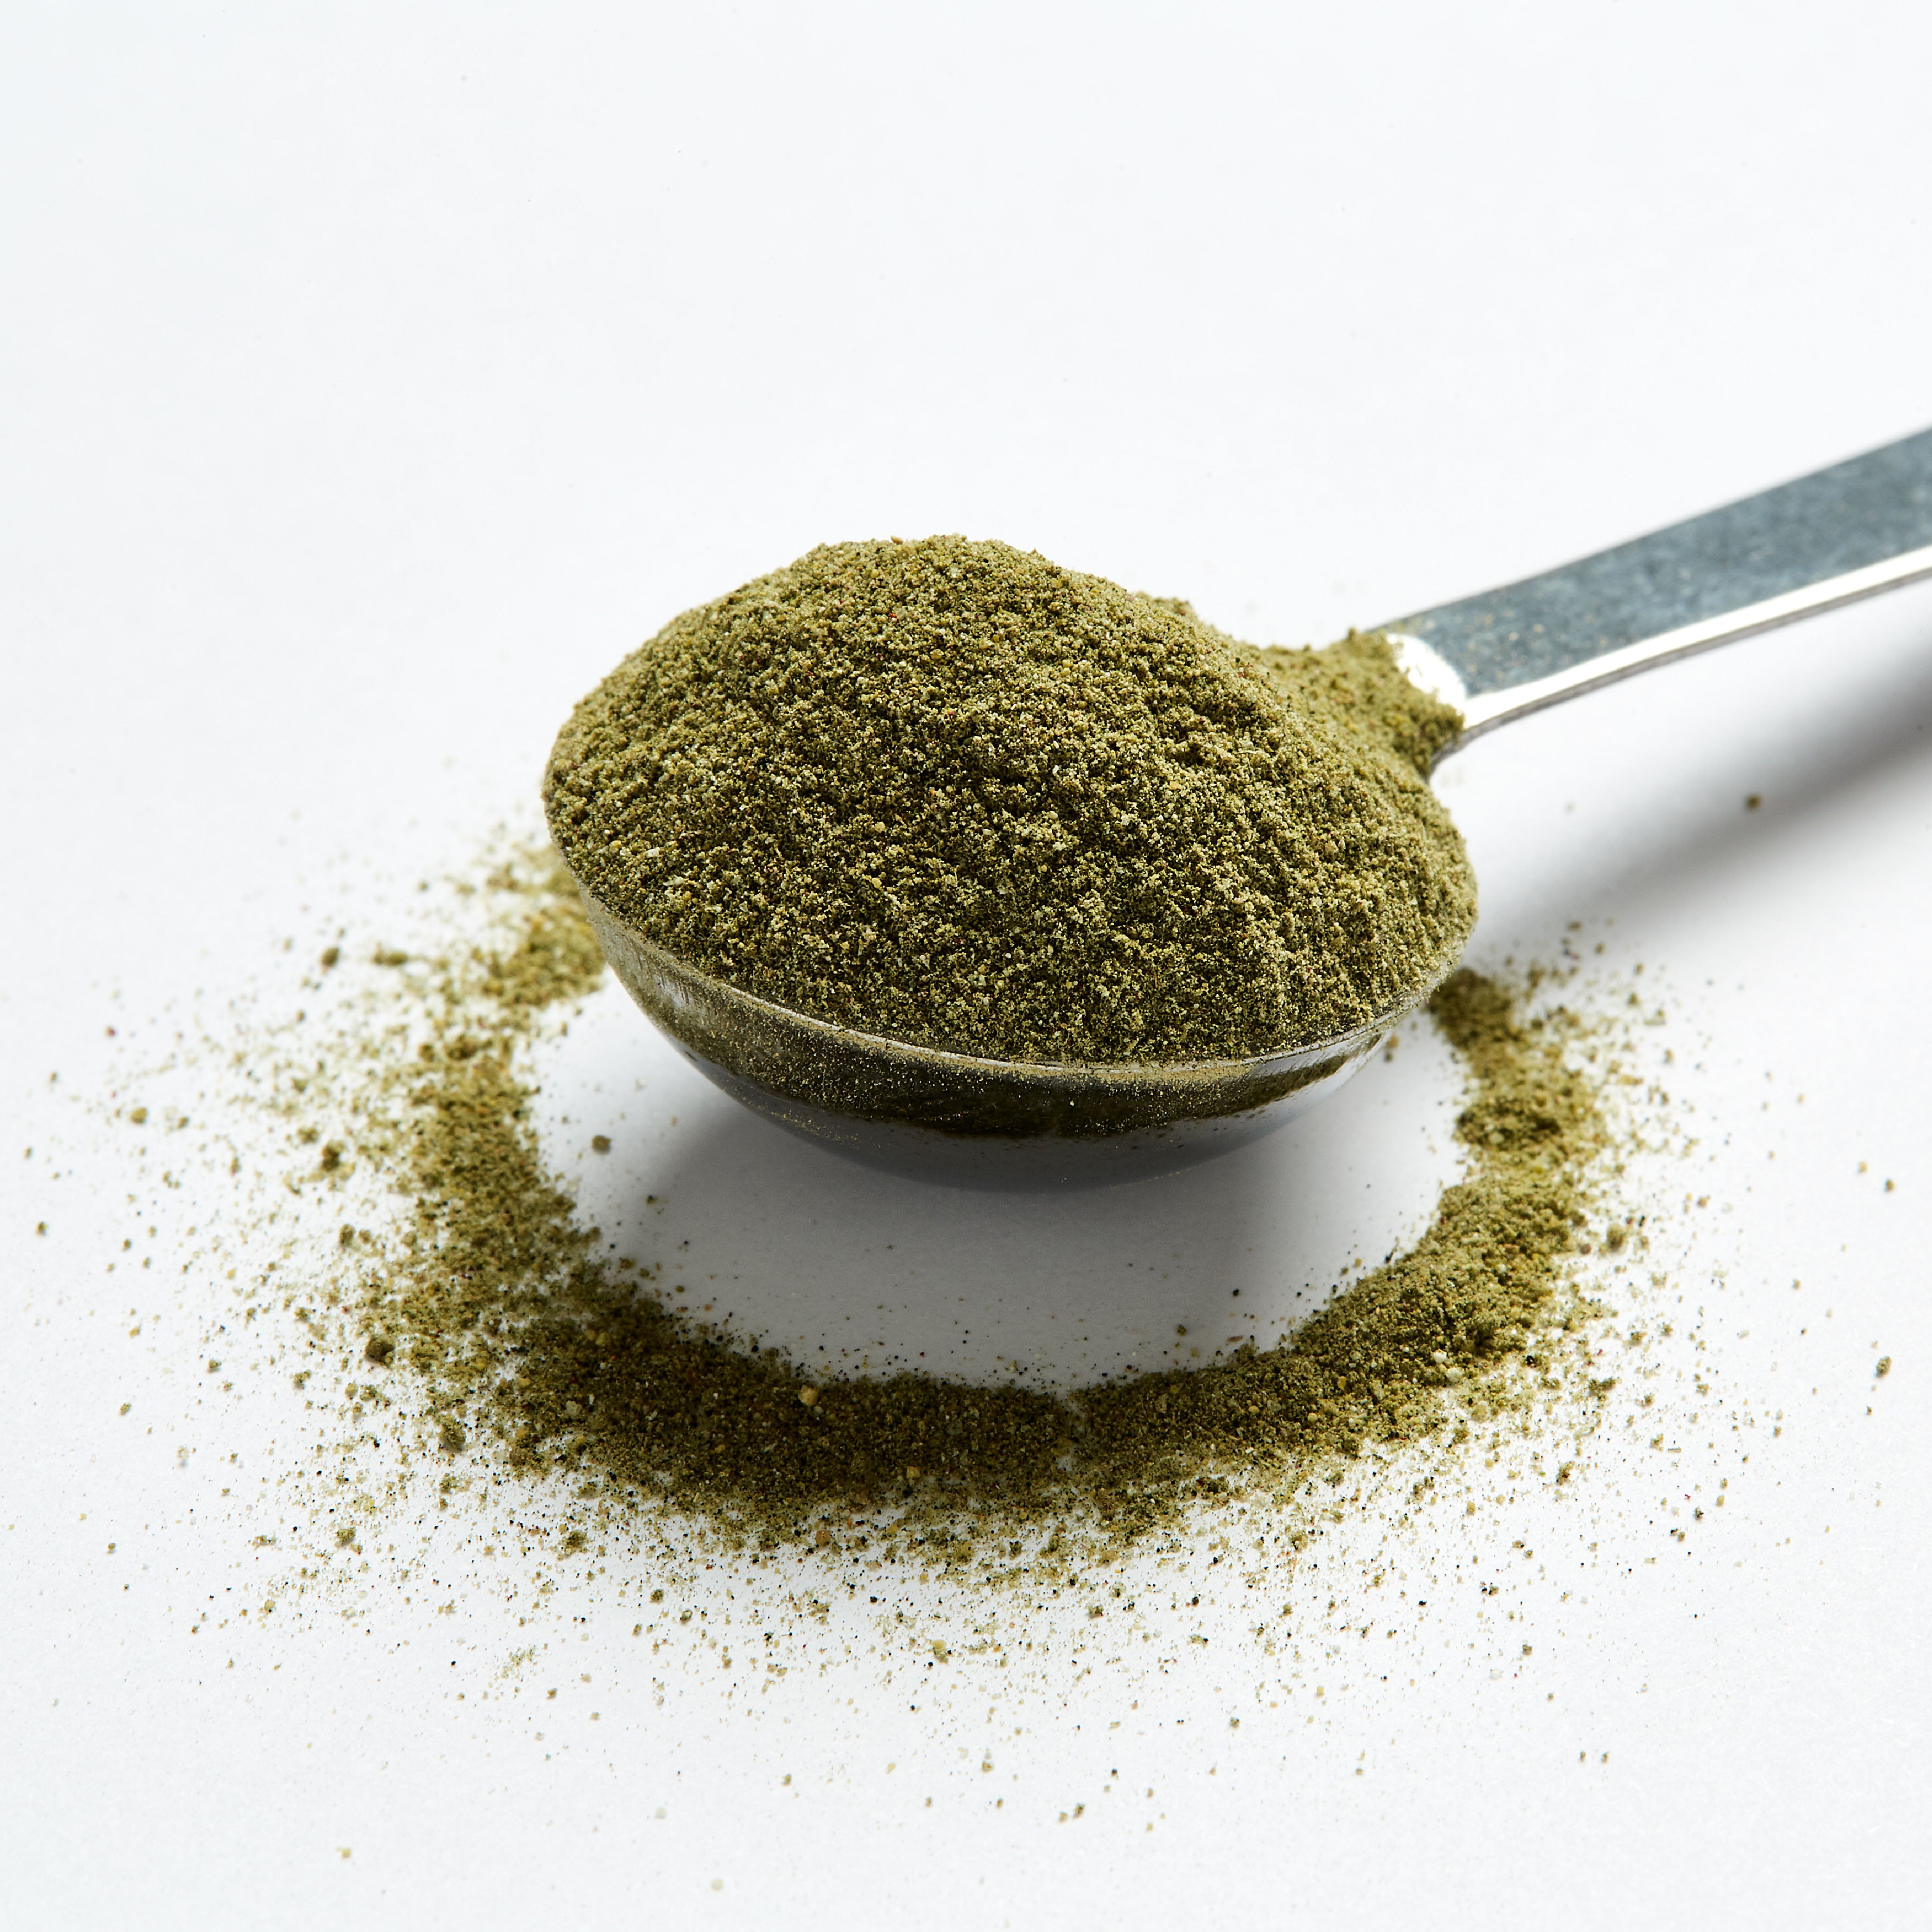 What Should You Look For When Choosing the Best Greens Powder?